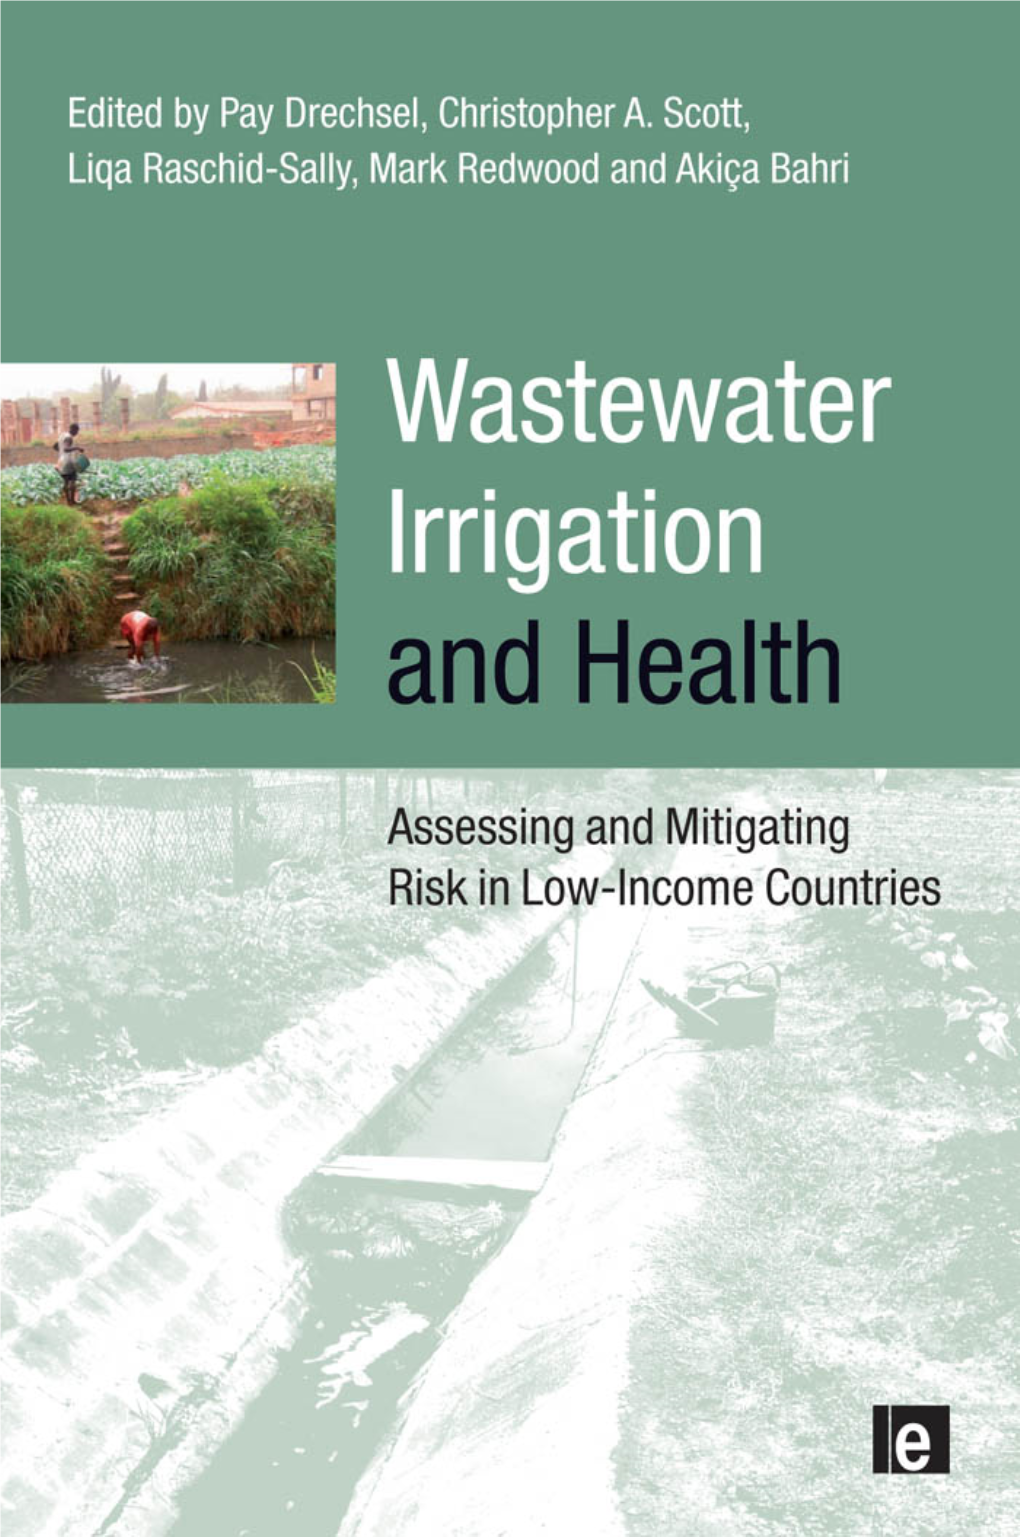 Wastewater Irrigation and Health This Page Intentionally Left Blank Wastewater Irrigation and Health Assessing and Mitigating Risk in Low-Income Countries